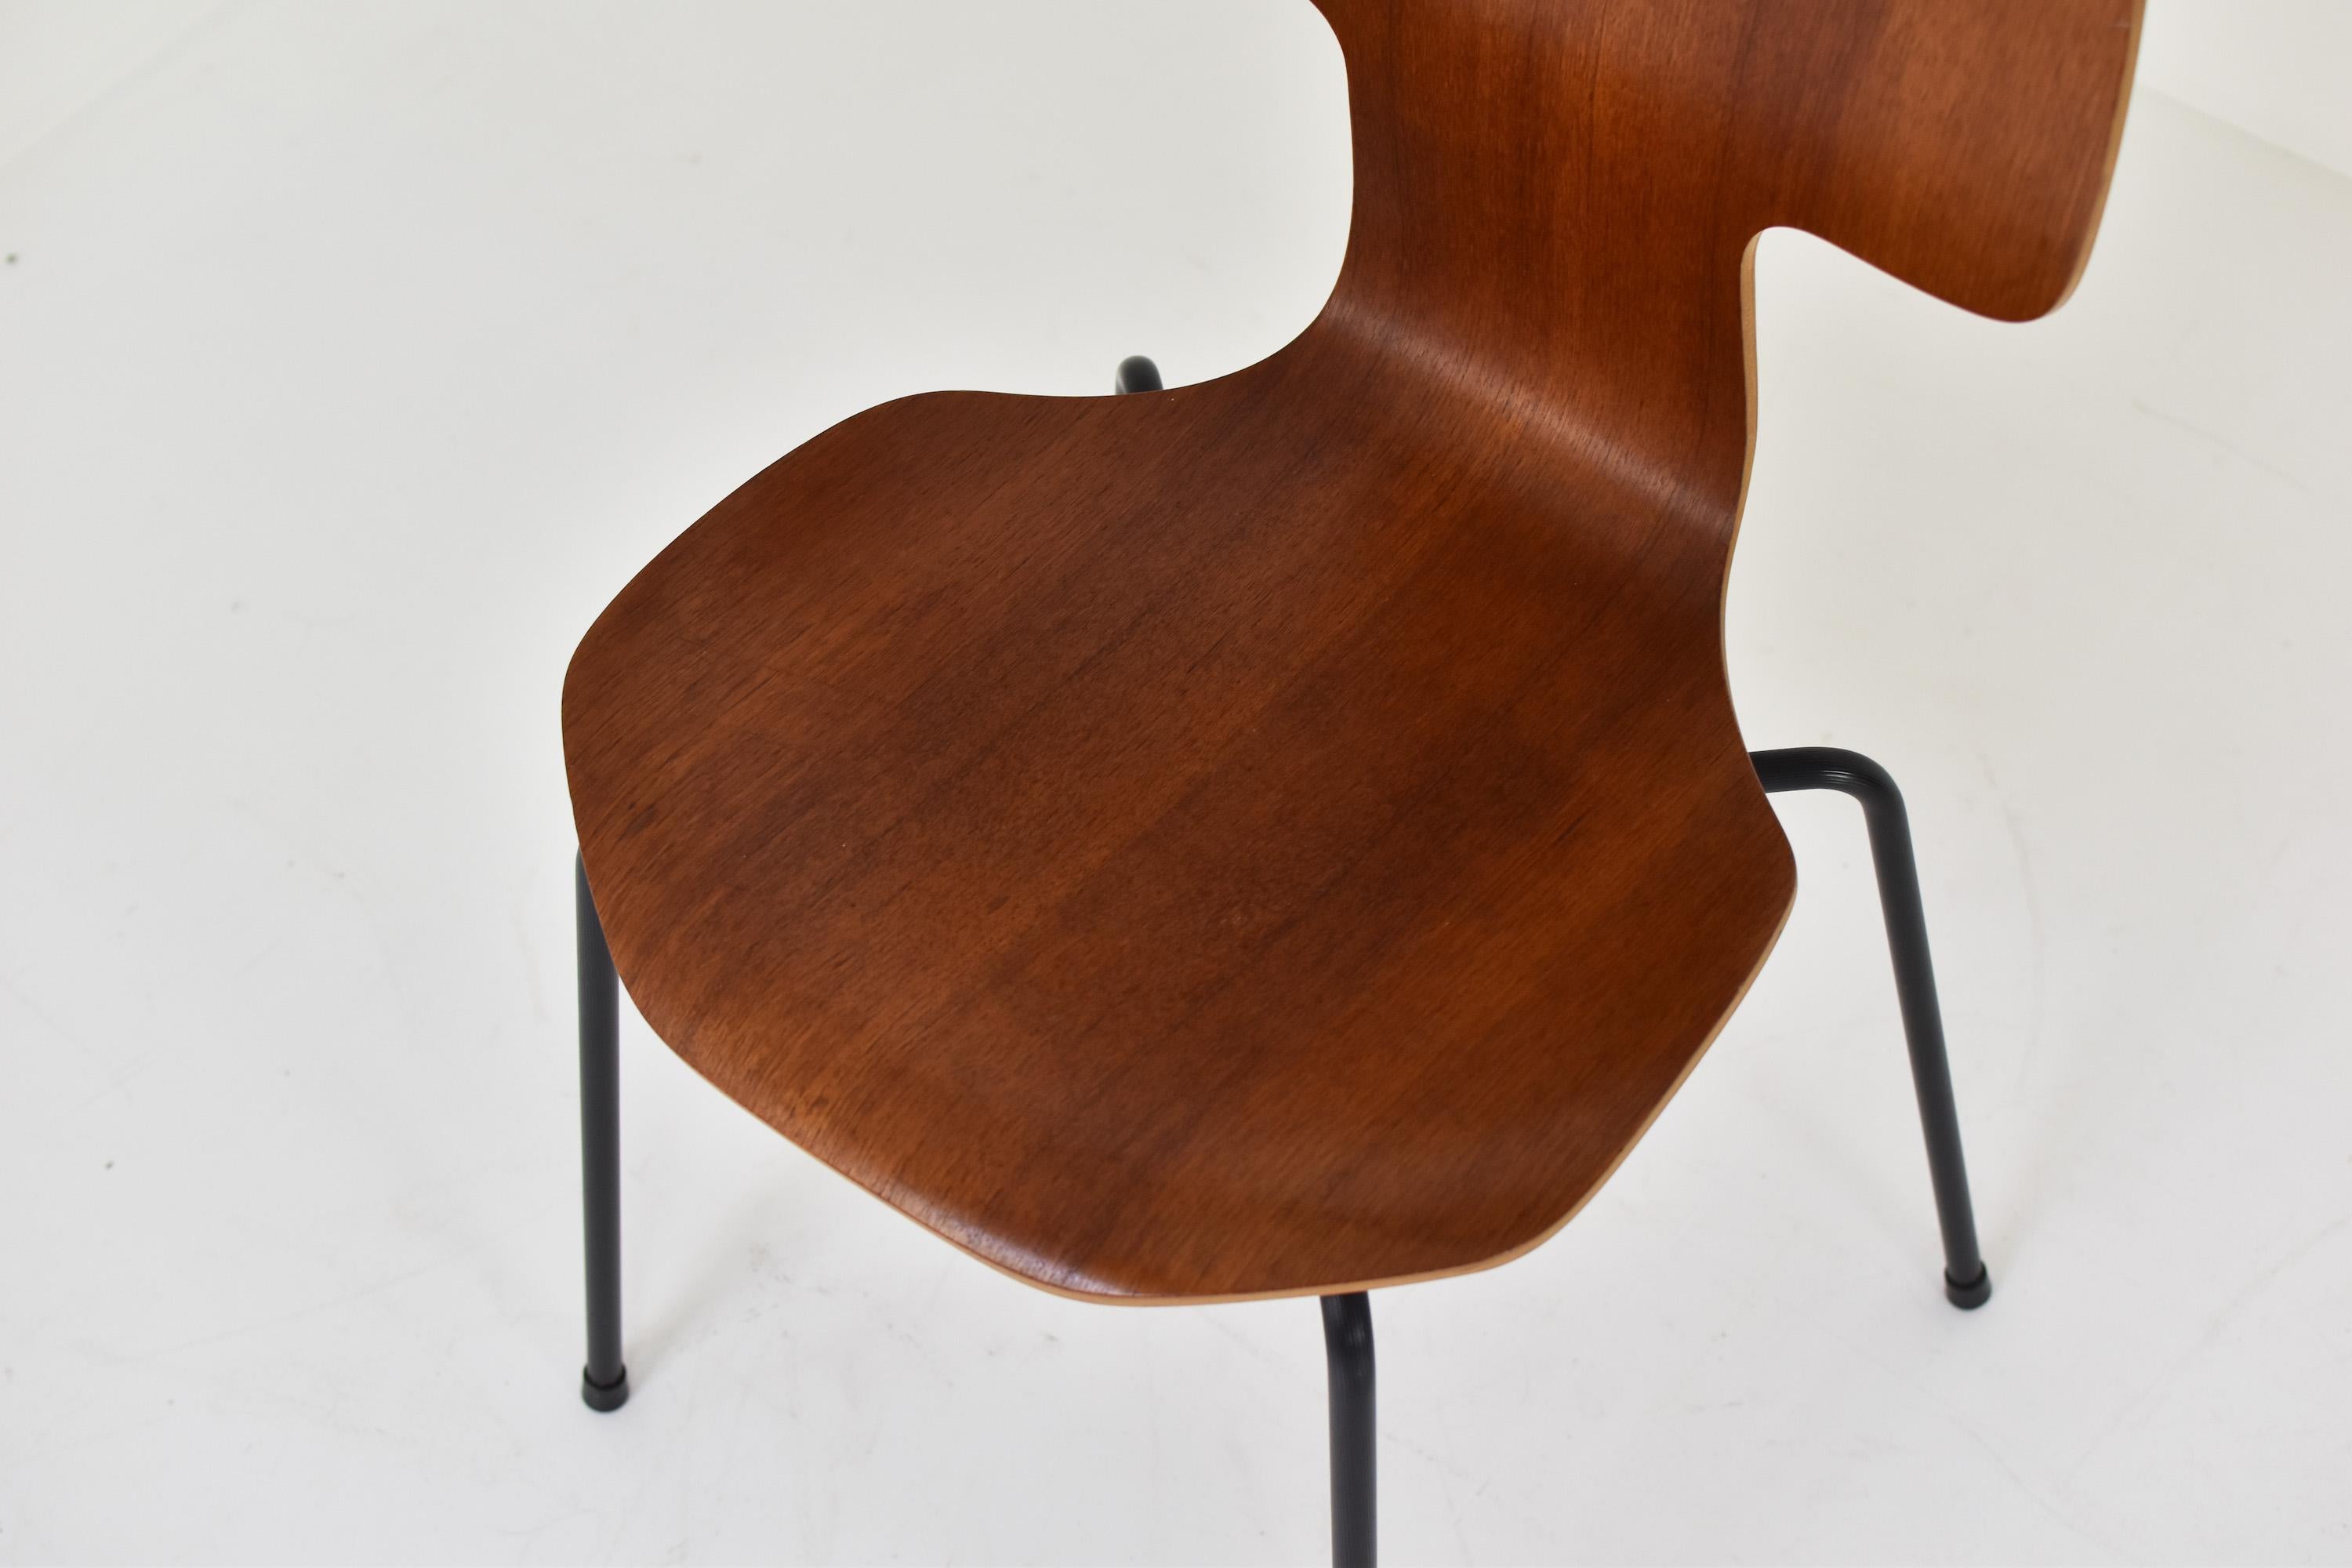 Mid-20th Century Set of 2 Early ‘Hammer’ Chairs by Arne Jacobsen for Fritz Hansen, Denmark 1960’s